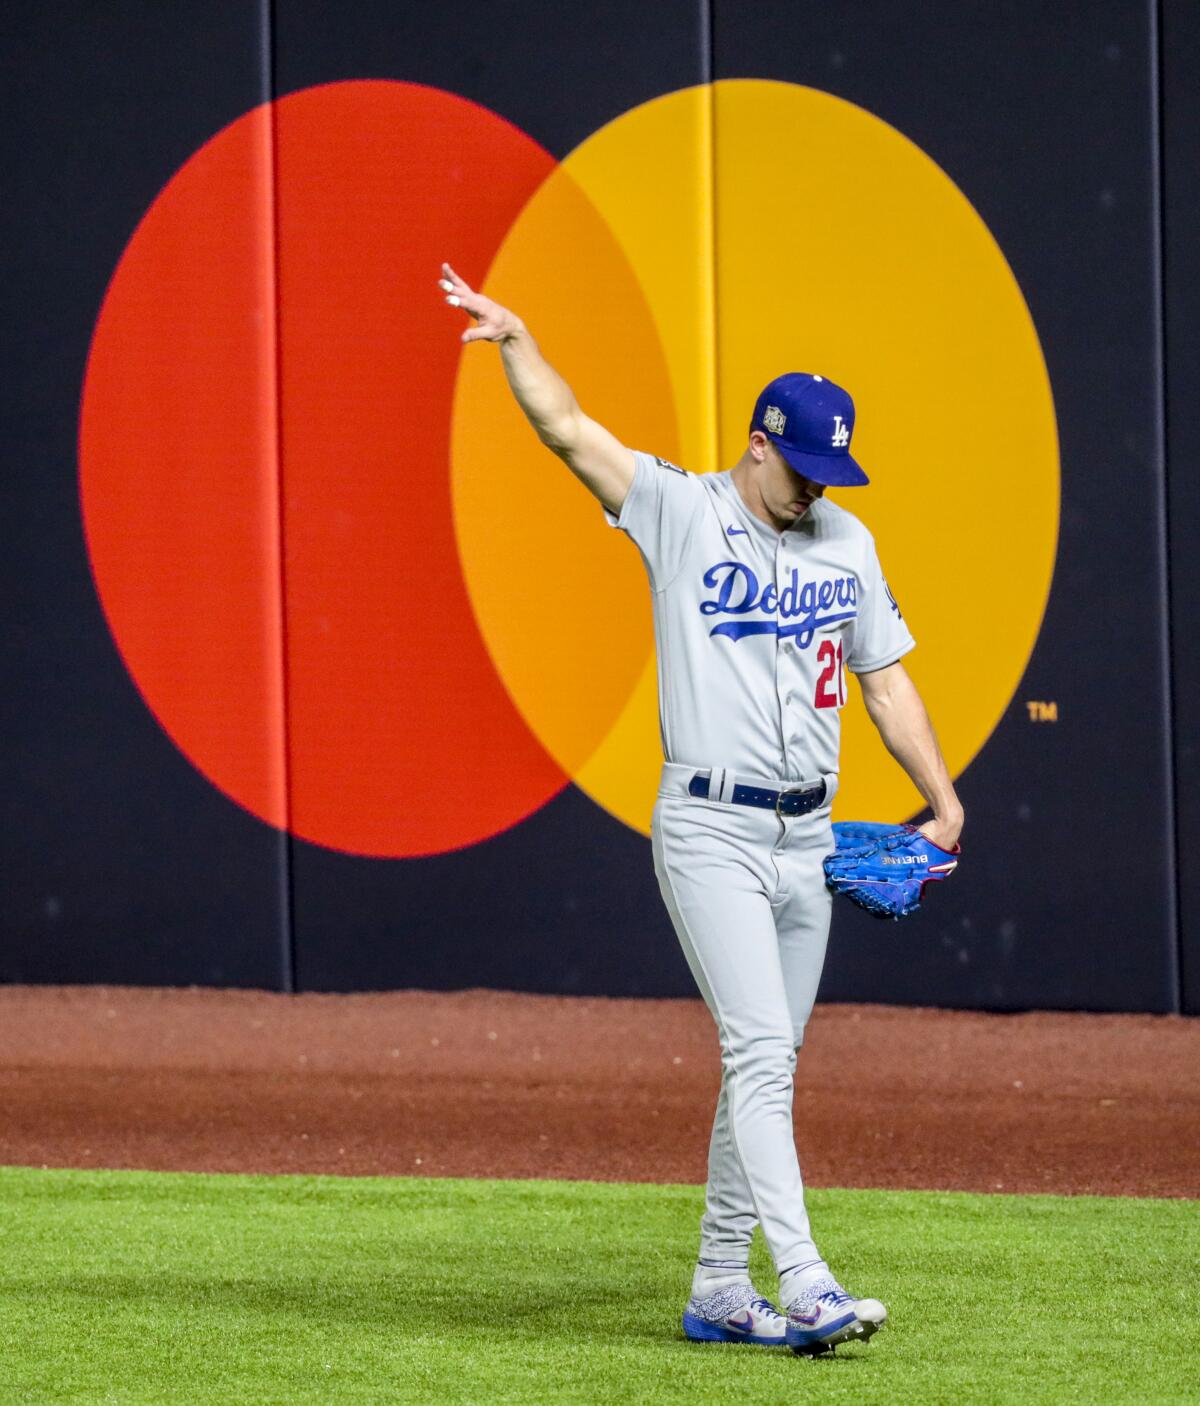 Dodgers starting pitcher Walker Buehler stretches in the outfield before Game 3 of the World Series on Friday.